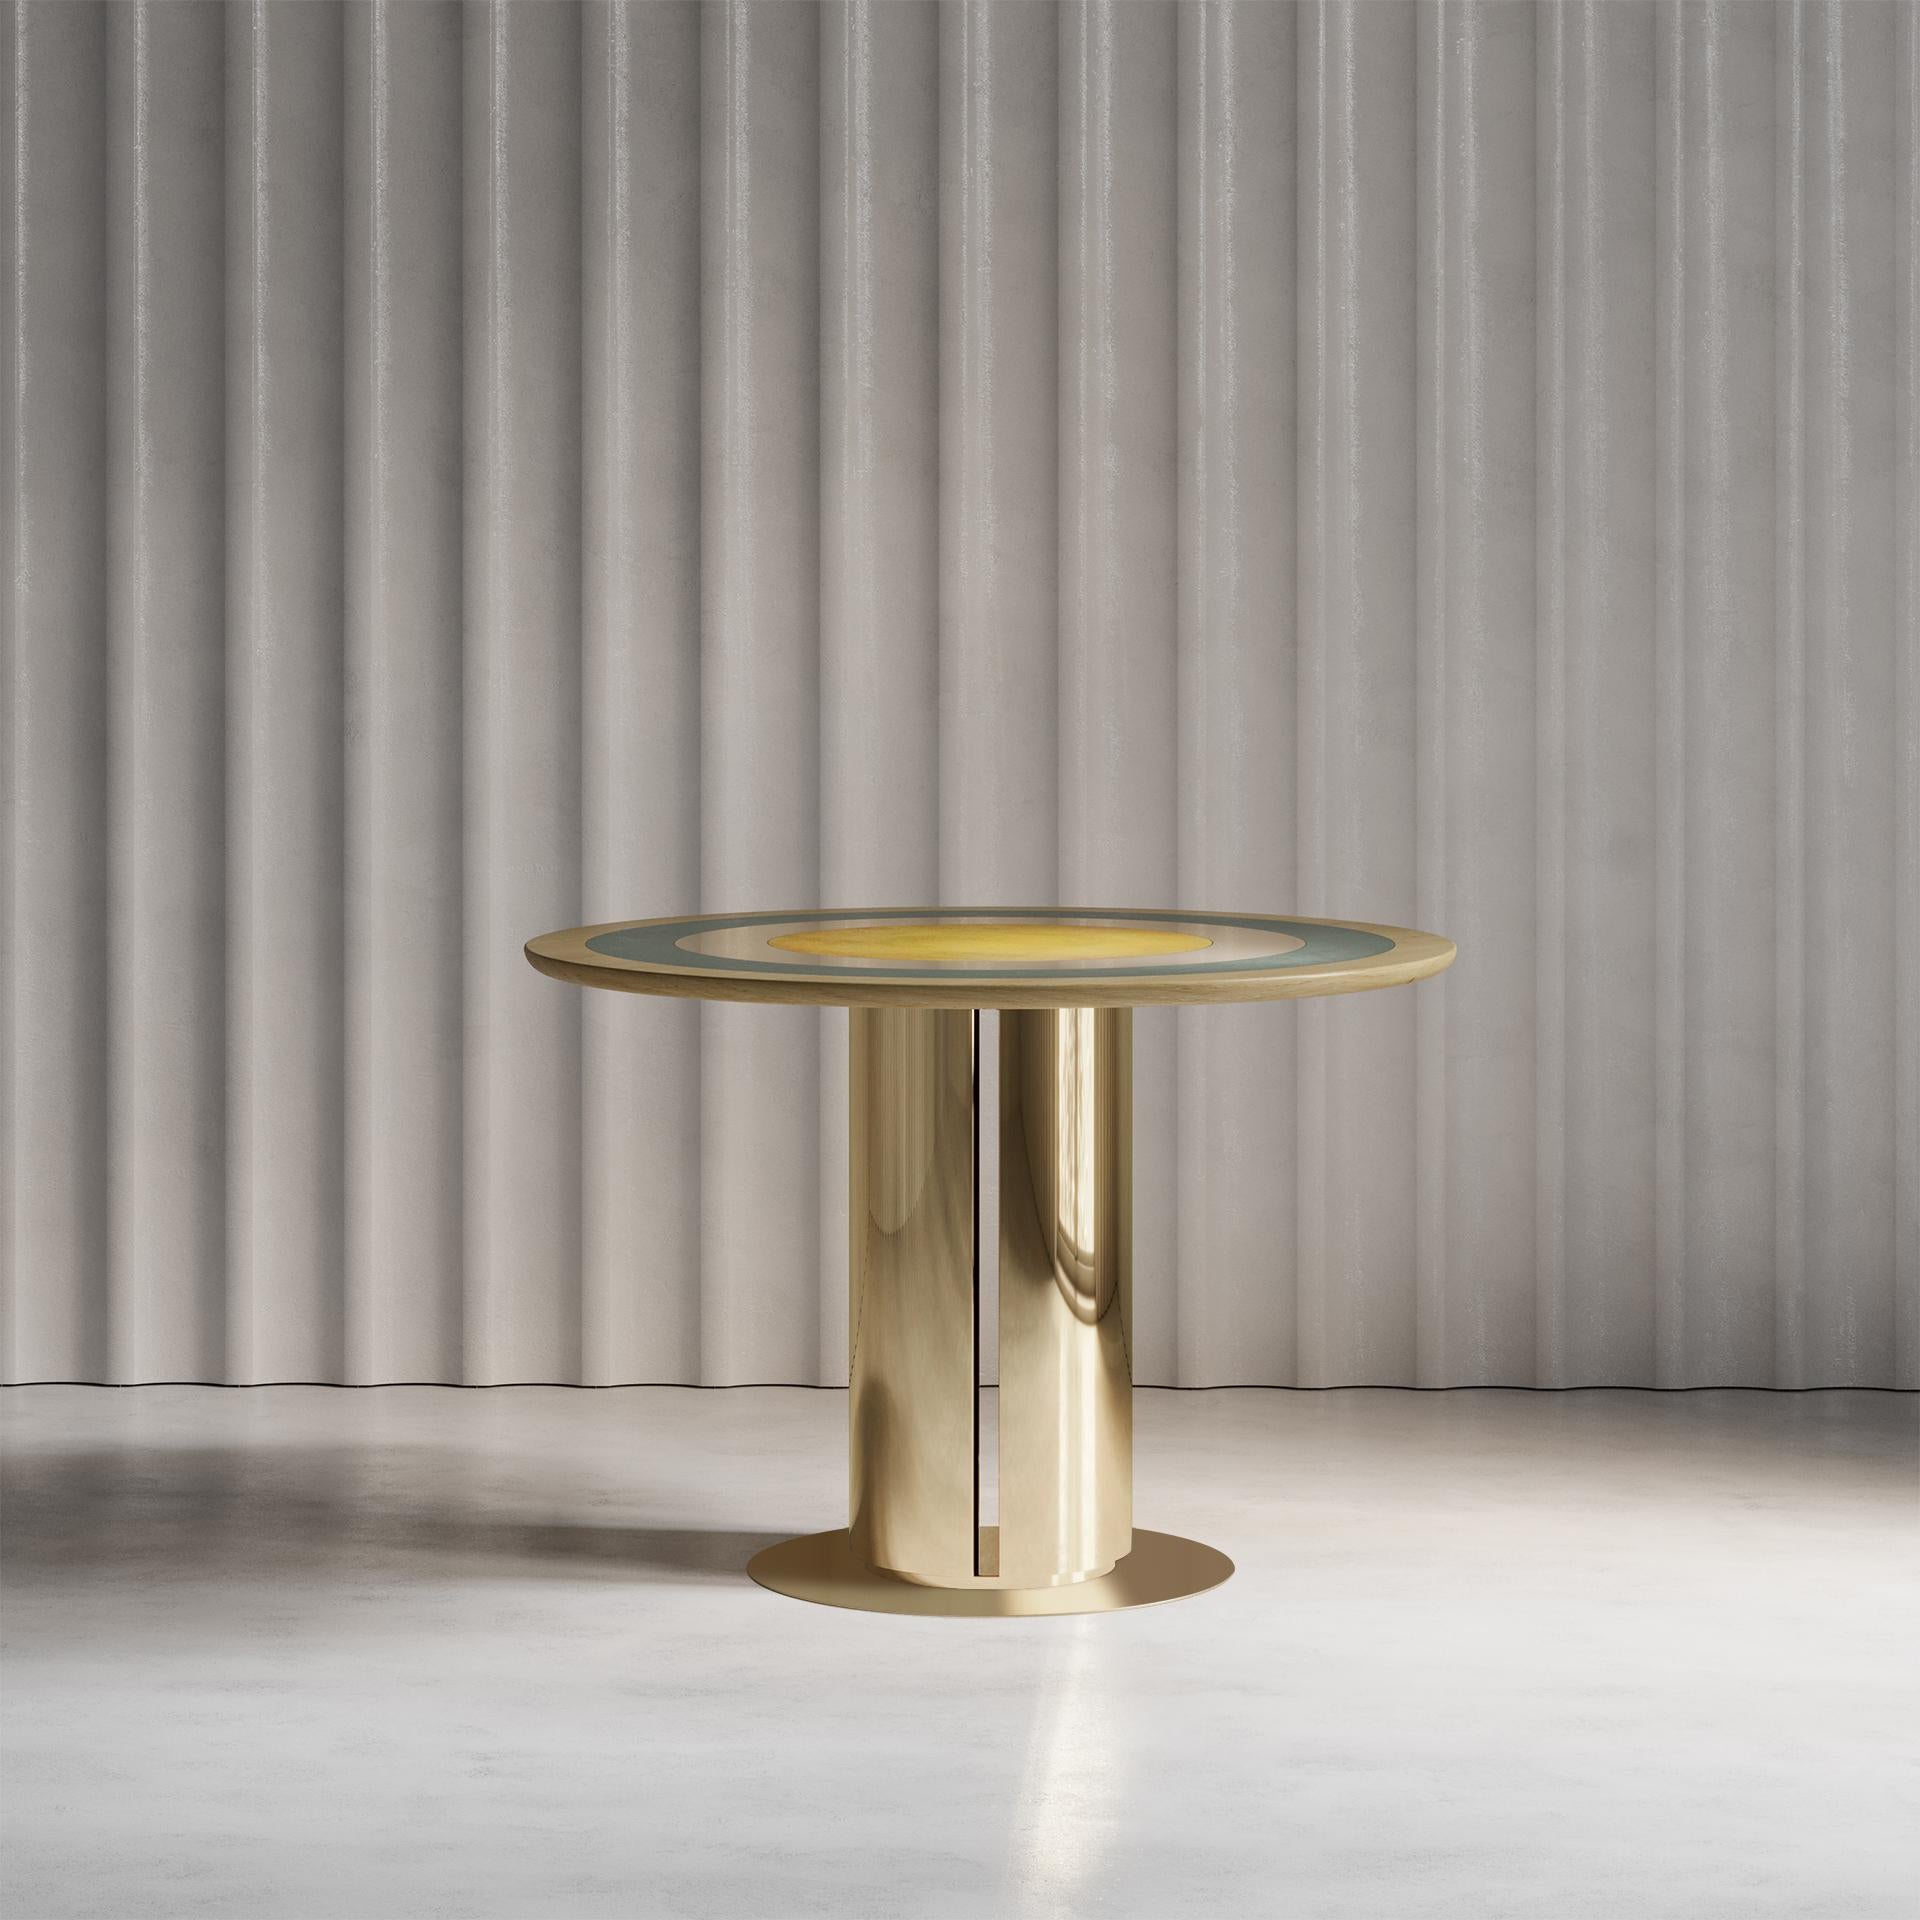 Inspired by the playfulness of a merry-go-round, the Carousel Dining Table Aurum combines both brass and wood. Using hand-spun brass, Solid Sycamore, Sycamore veneer, and a selection of our signature patinas, this Carousel piece plays with both